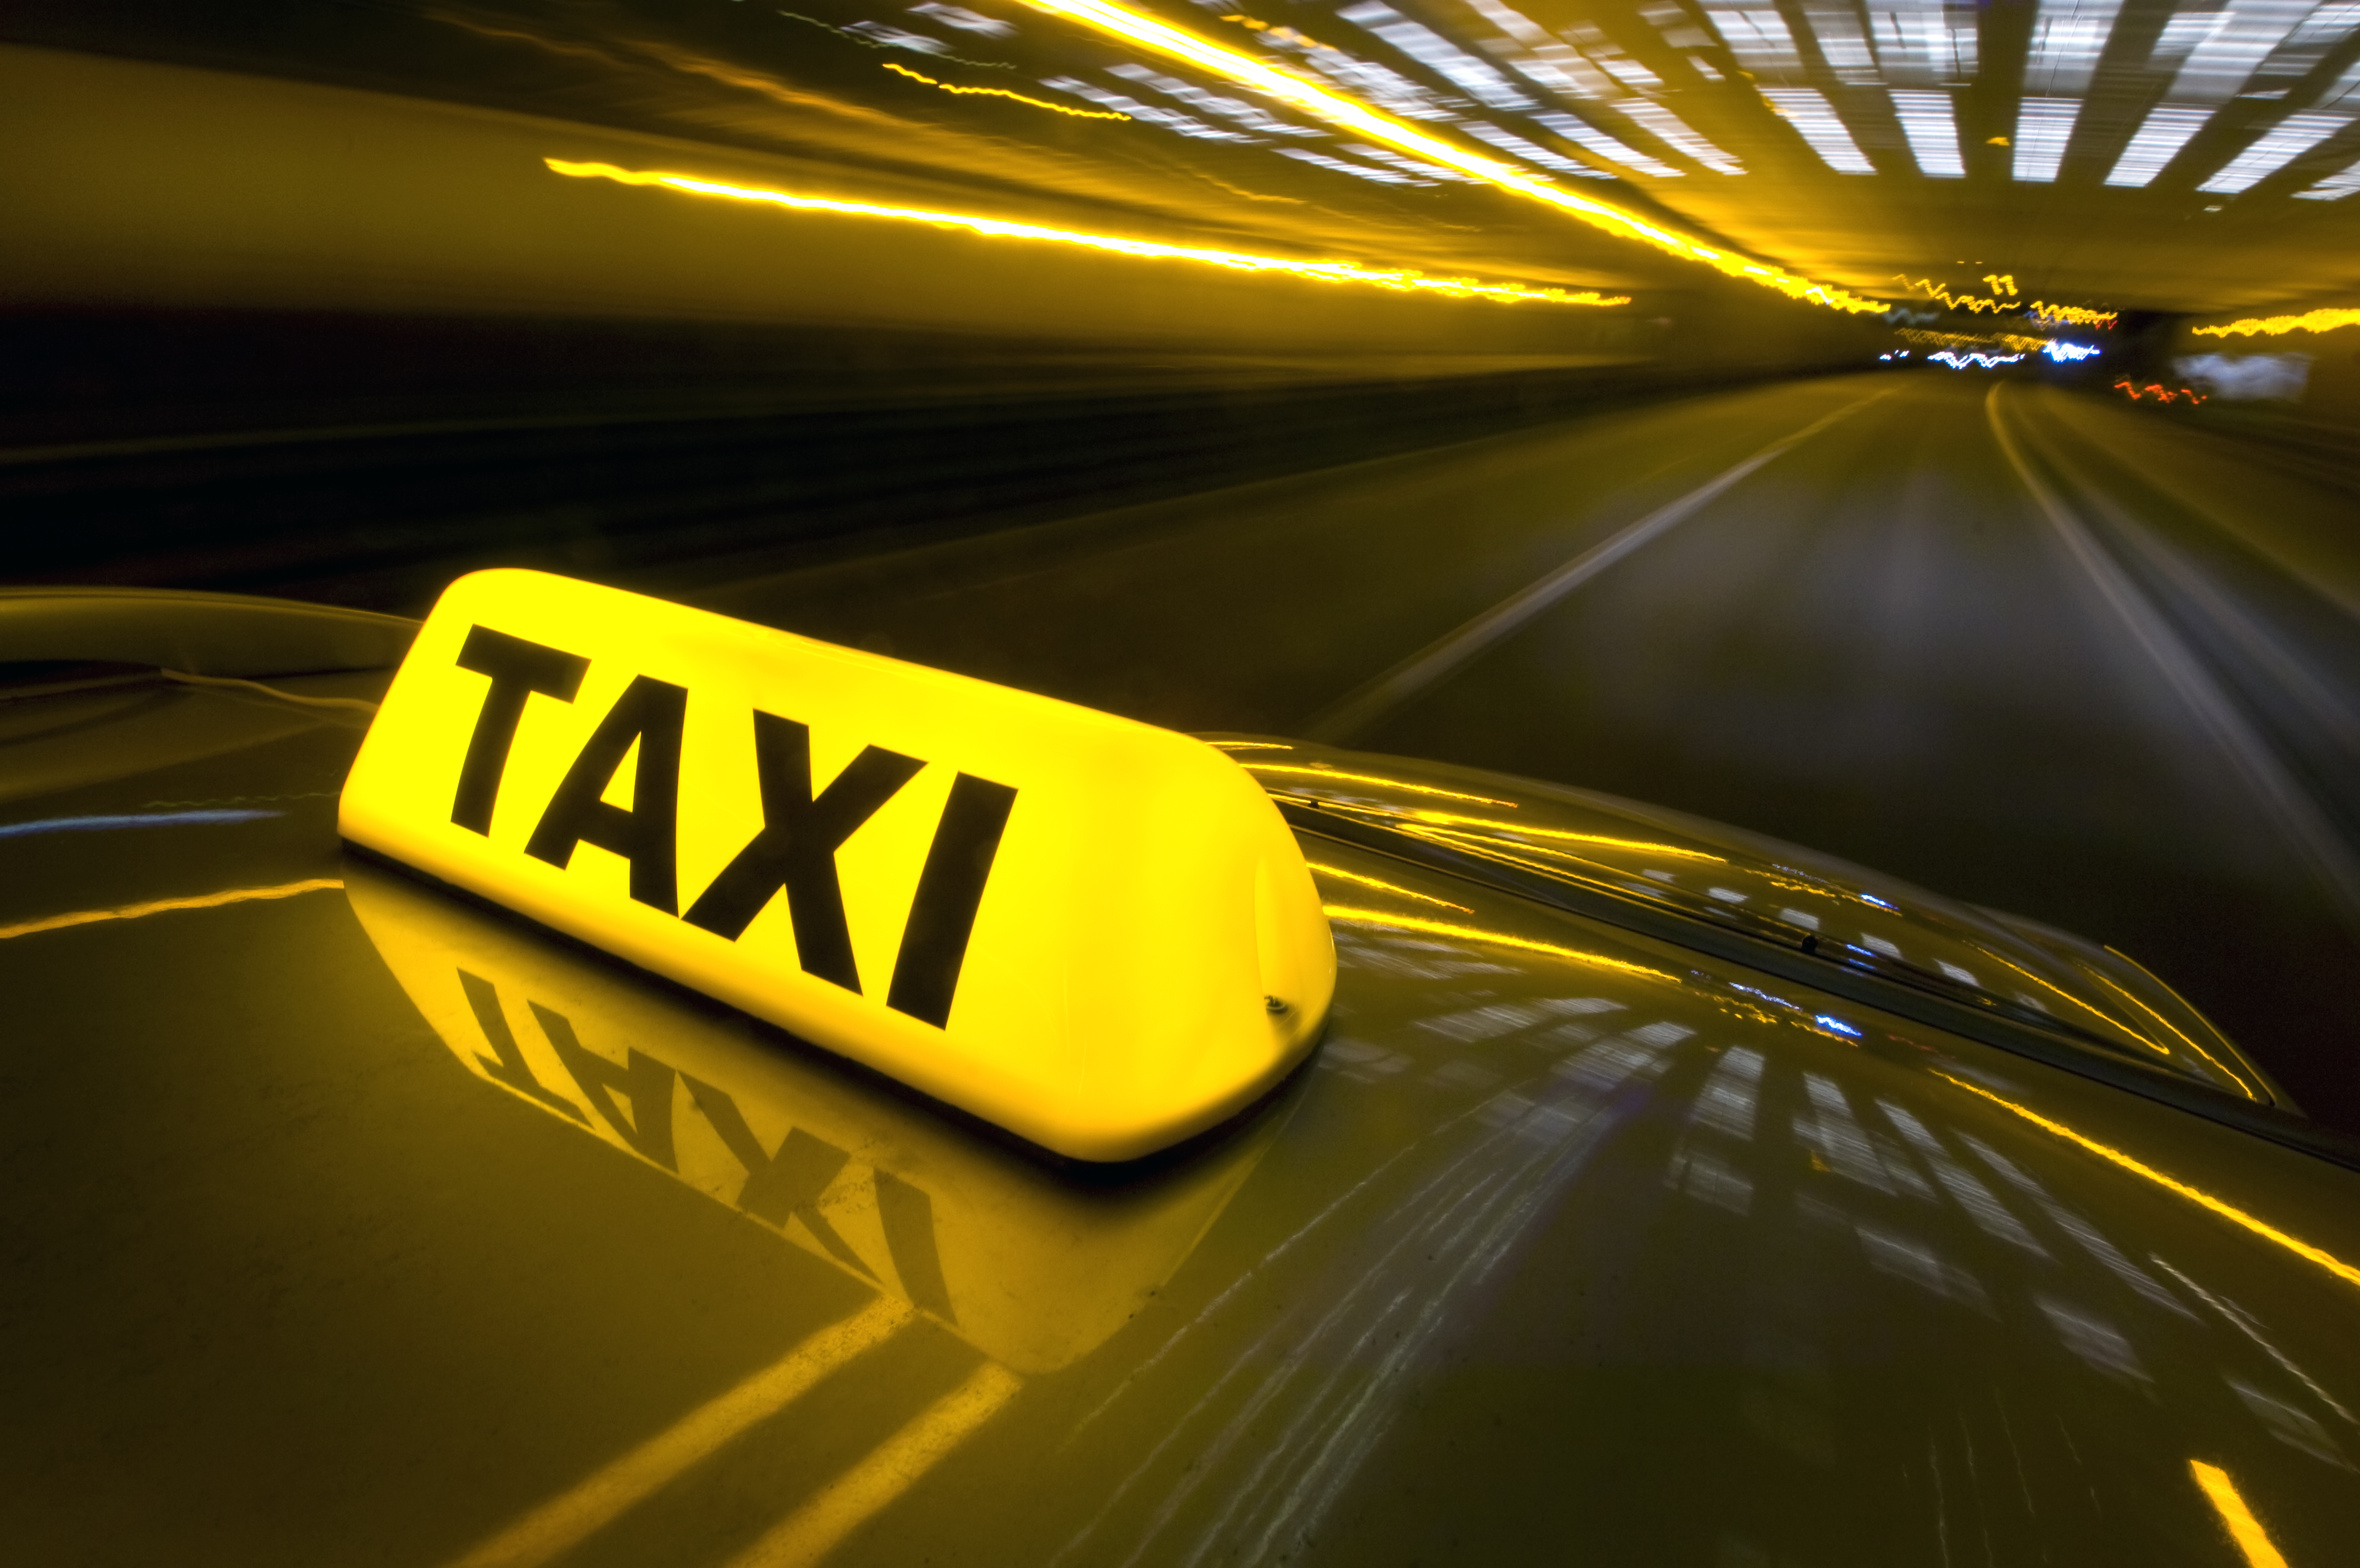 Why not have $1 million liability limits for taxis?